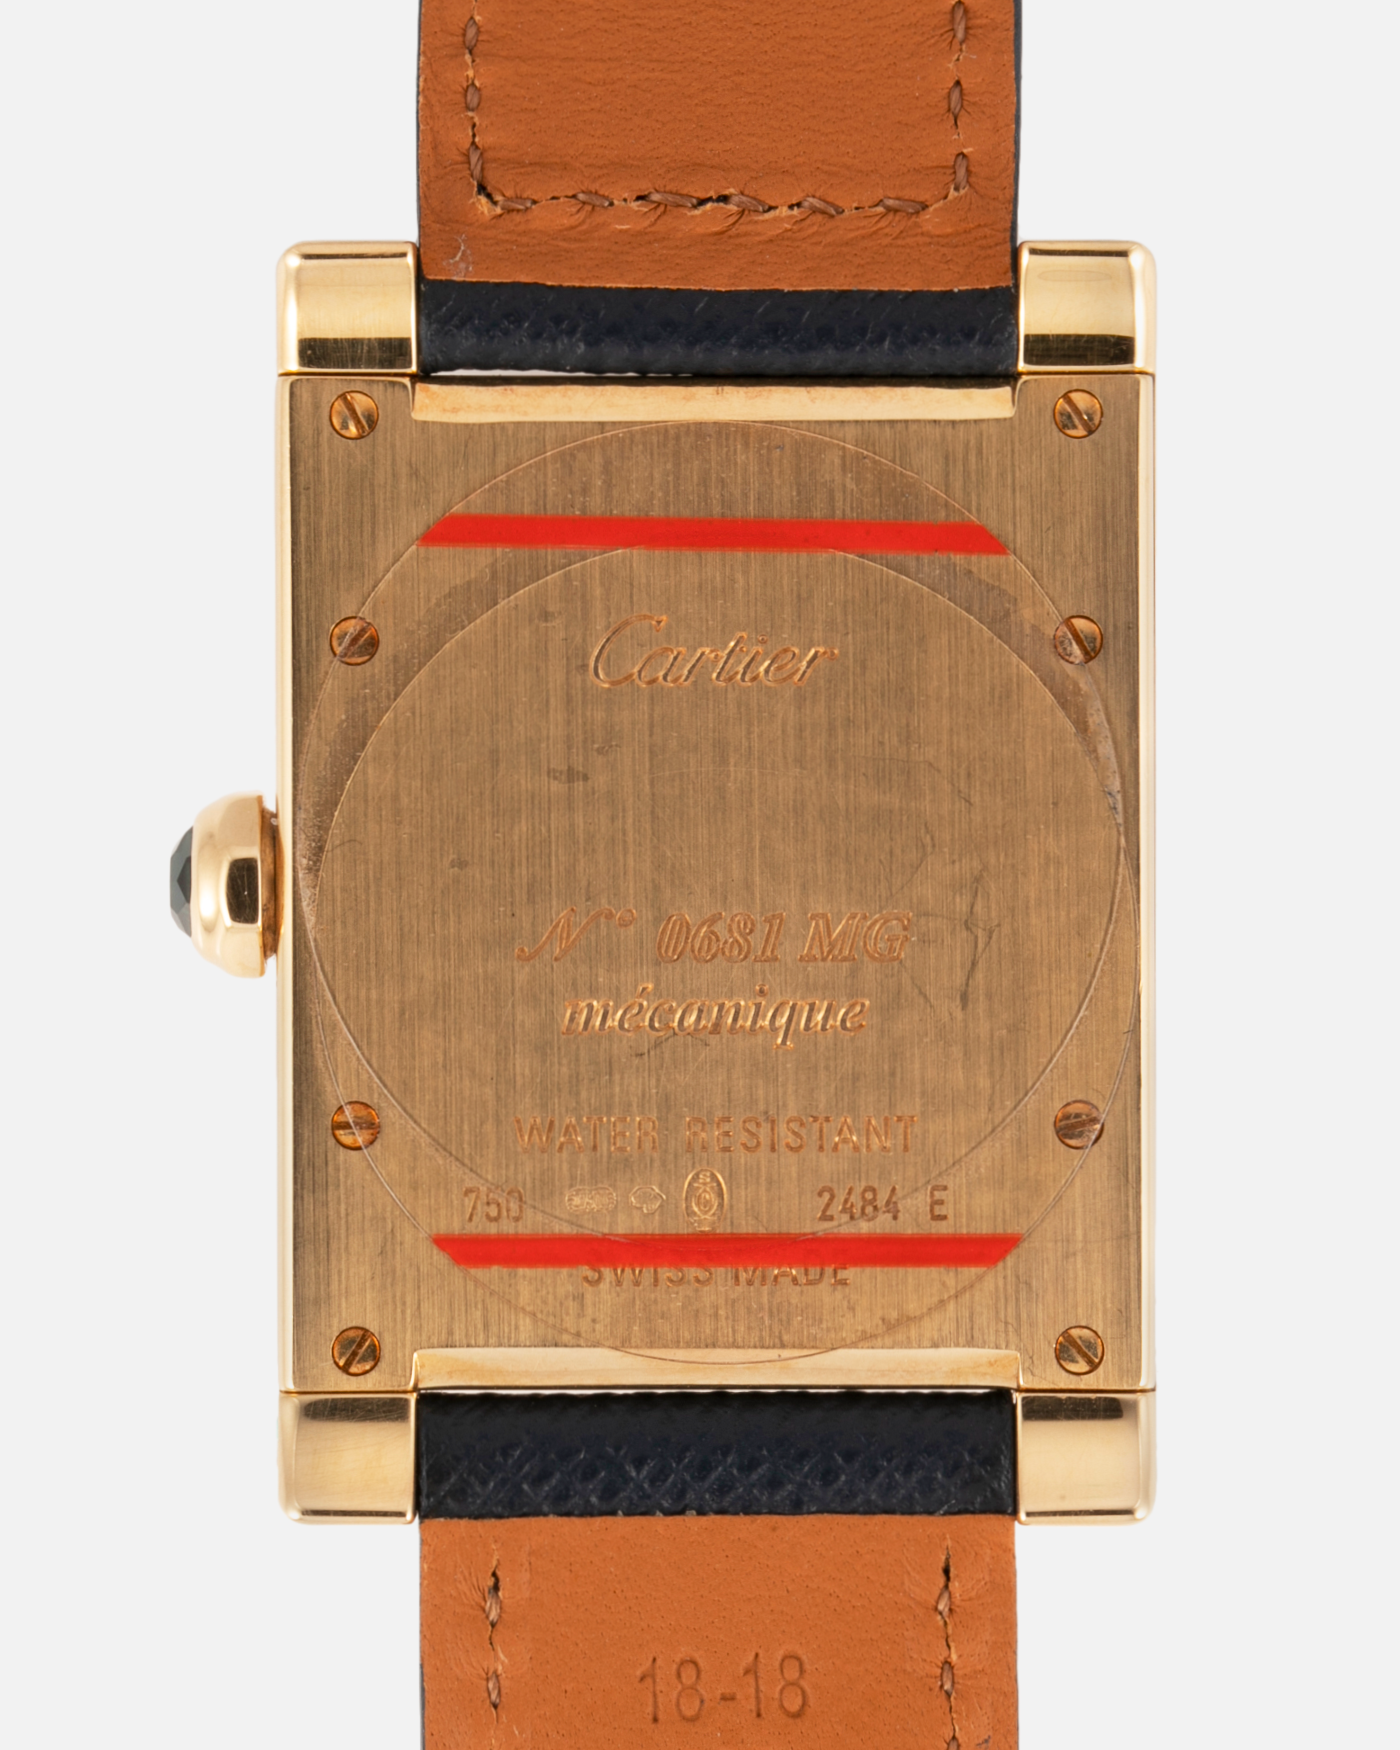 Brand: Cartier Year: 2000’s Model: Tank A Vis Material: 18k Yellow Gold Movement: Cartier 437MC Case Diameter: 26mm X 39mm Strap: Molequin Navy Blue Textured Calf and 18k Yellow Gold Deployant Clasp